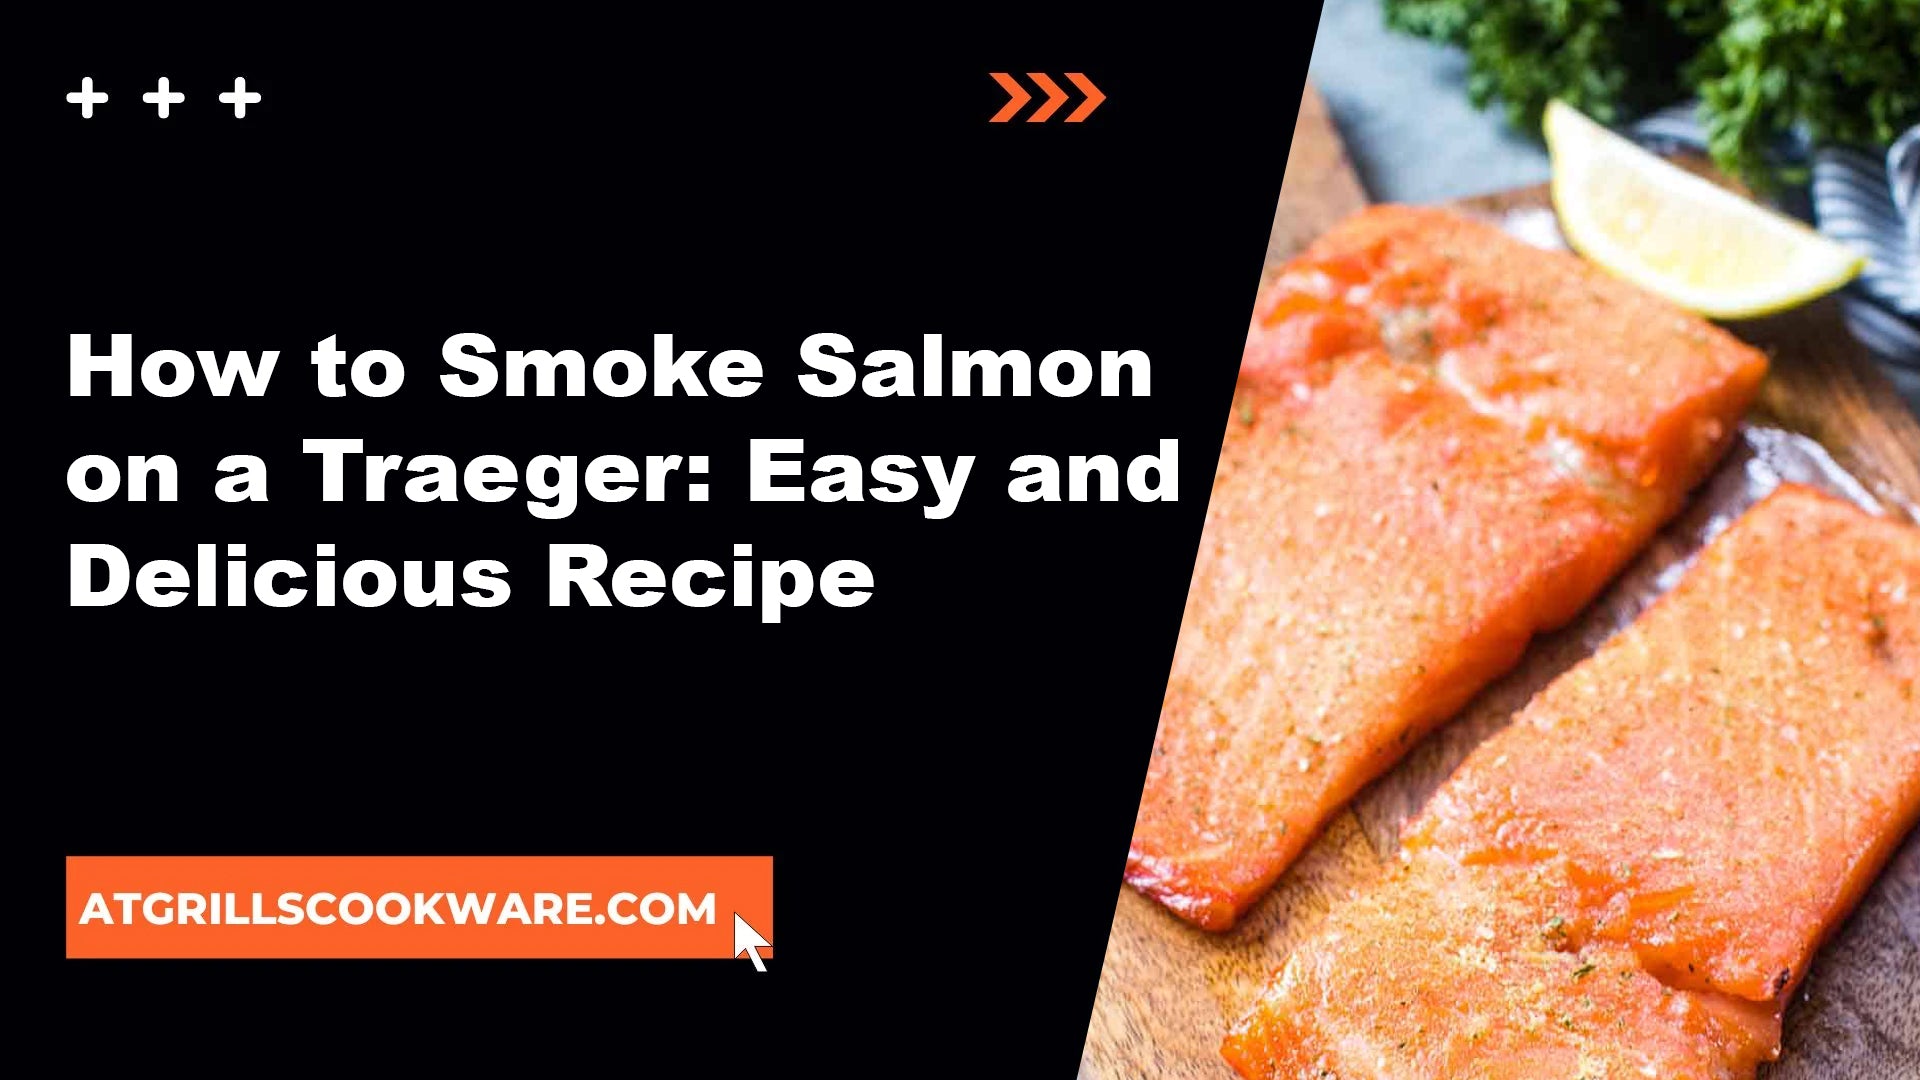 How to Smoke Salmon on a Traeger: Easy and Delicious Recipe